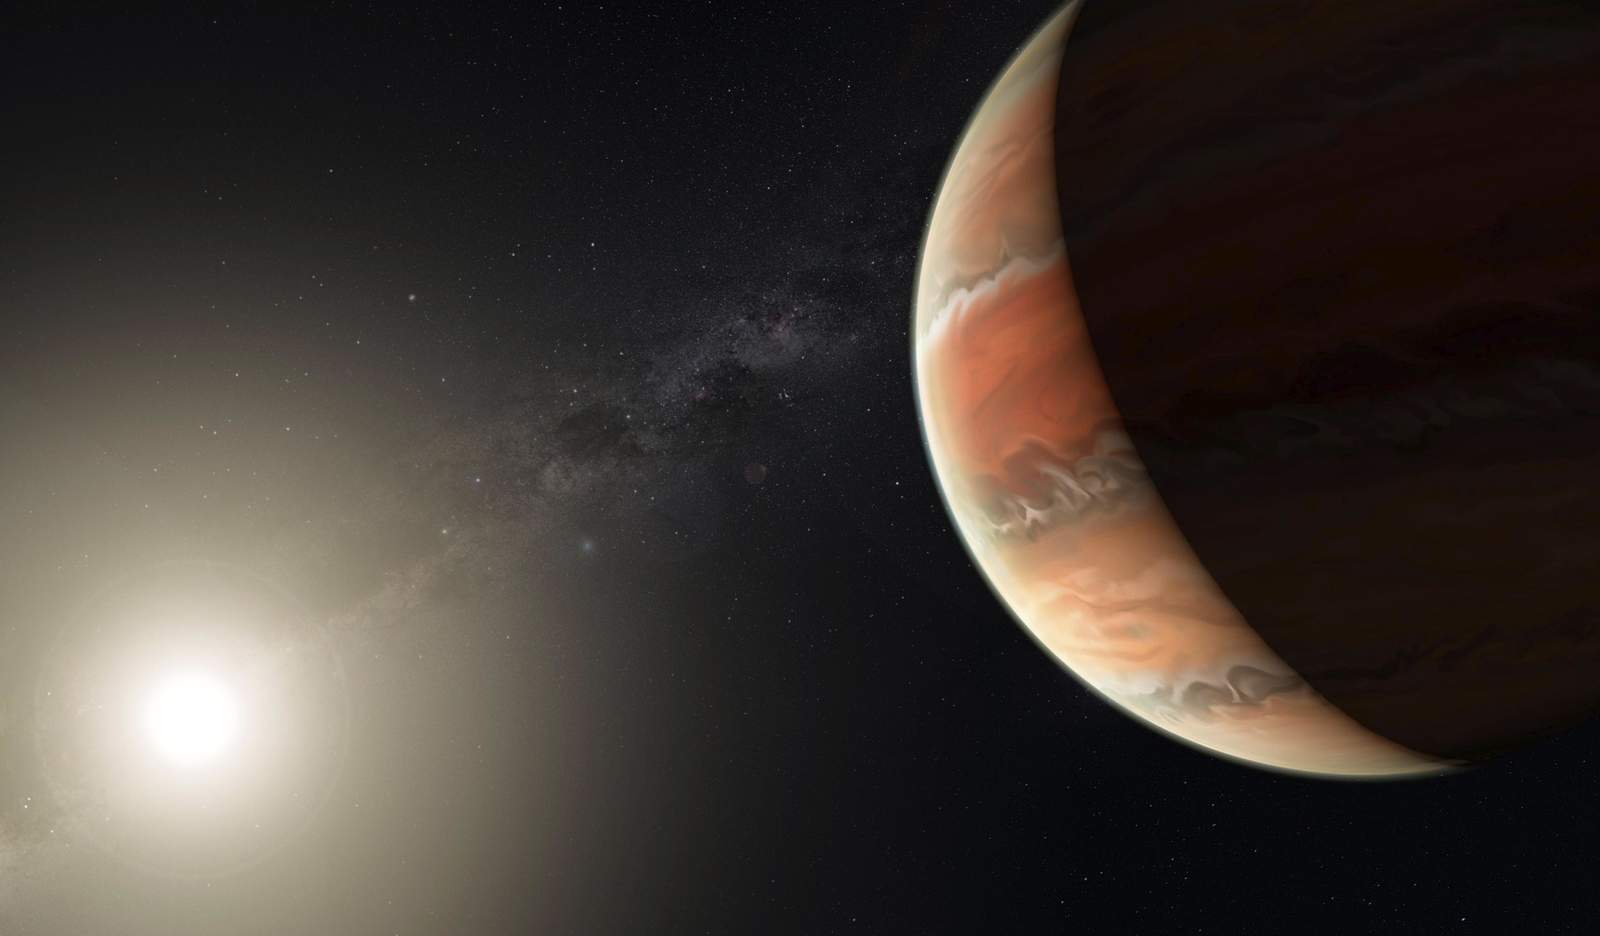 Satelite Cheops will study exoplanets